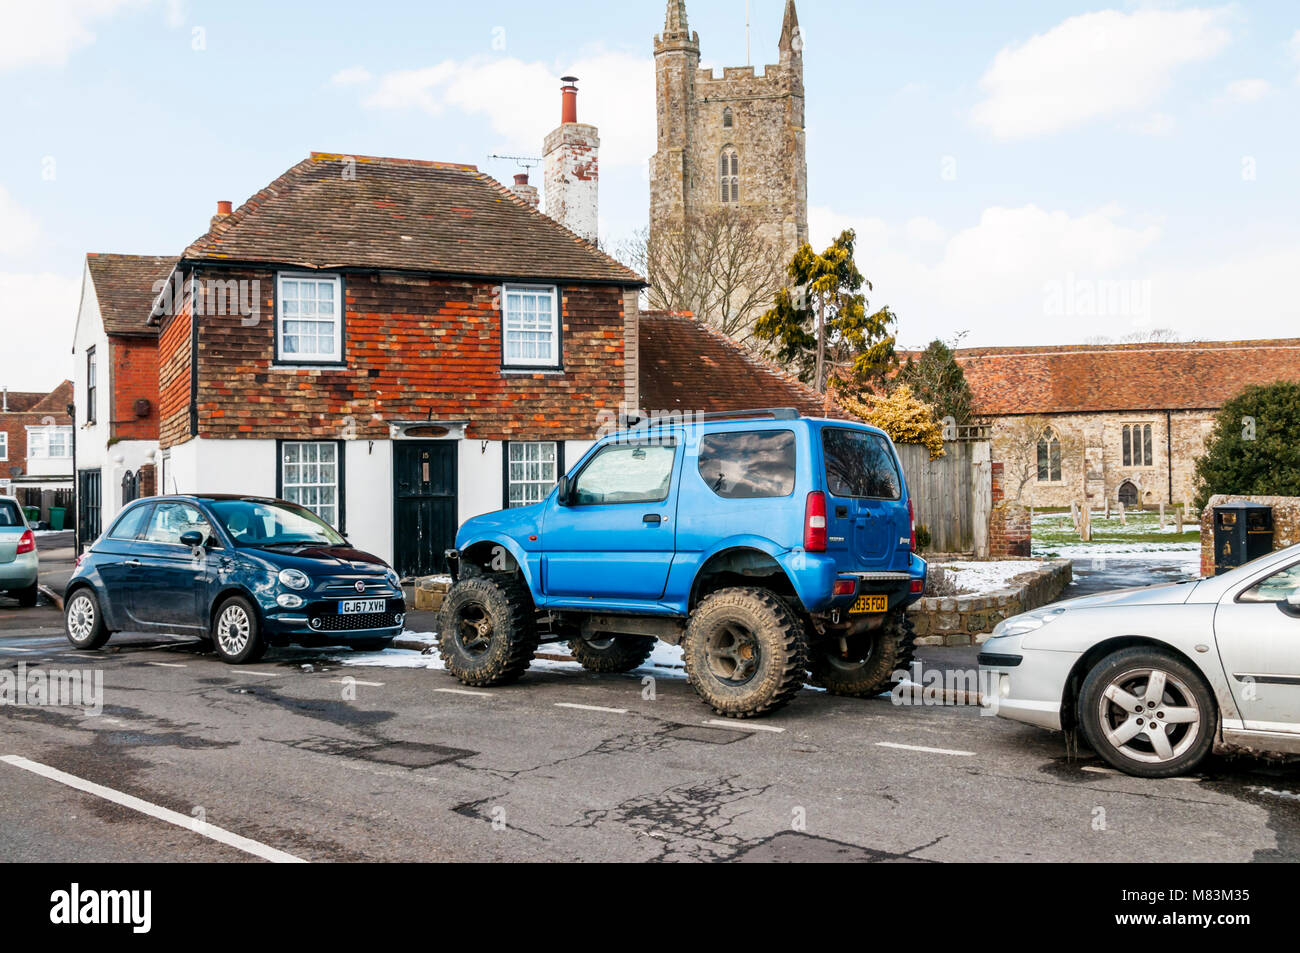 A blue Suzuki Jimny off-road 4x4 vehicle in Lydd on Romney Marsh, Kent.  With Malatesta off road tyres and lifted suspension. Stock Photo